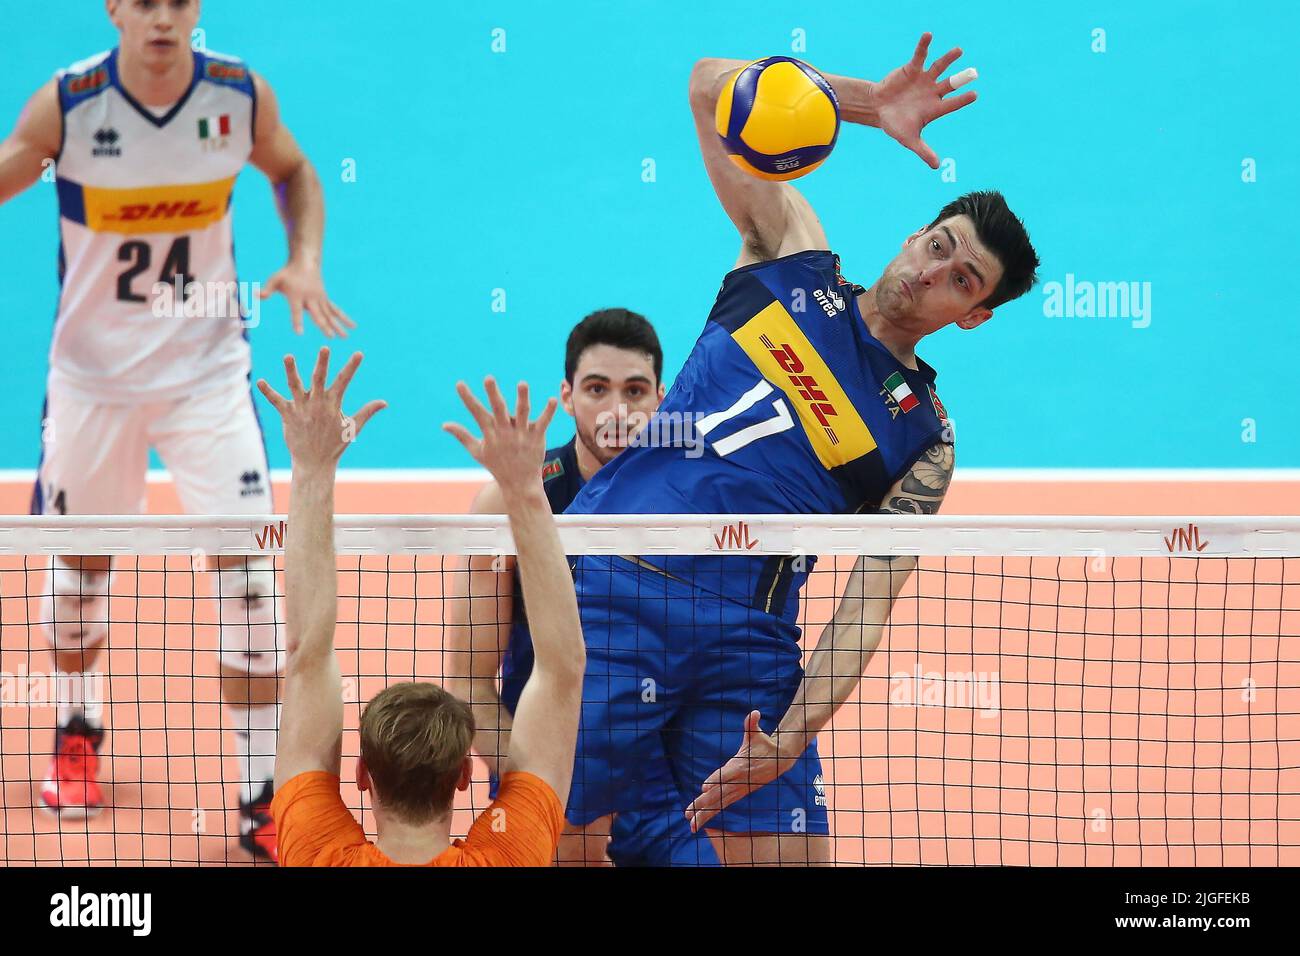 Gdansk, Poland. 10th July, 2022. W³och Simone Anzani (R) of Italy during the 2022 men's FIVB Volleyball Nations League match between Italy and the Netherlands in Gdansk, Poland, 10 July 2022. Credit: PAP/Alamy Live News Stock Photo